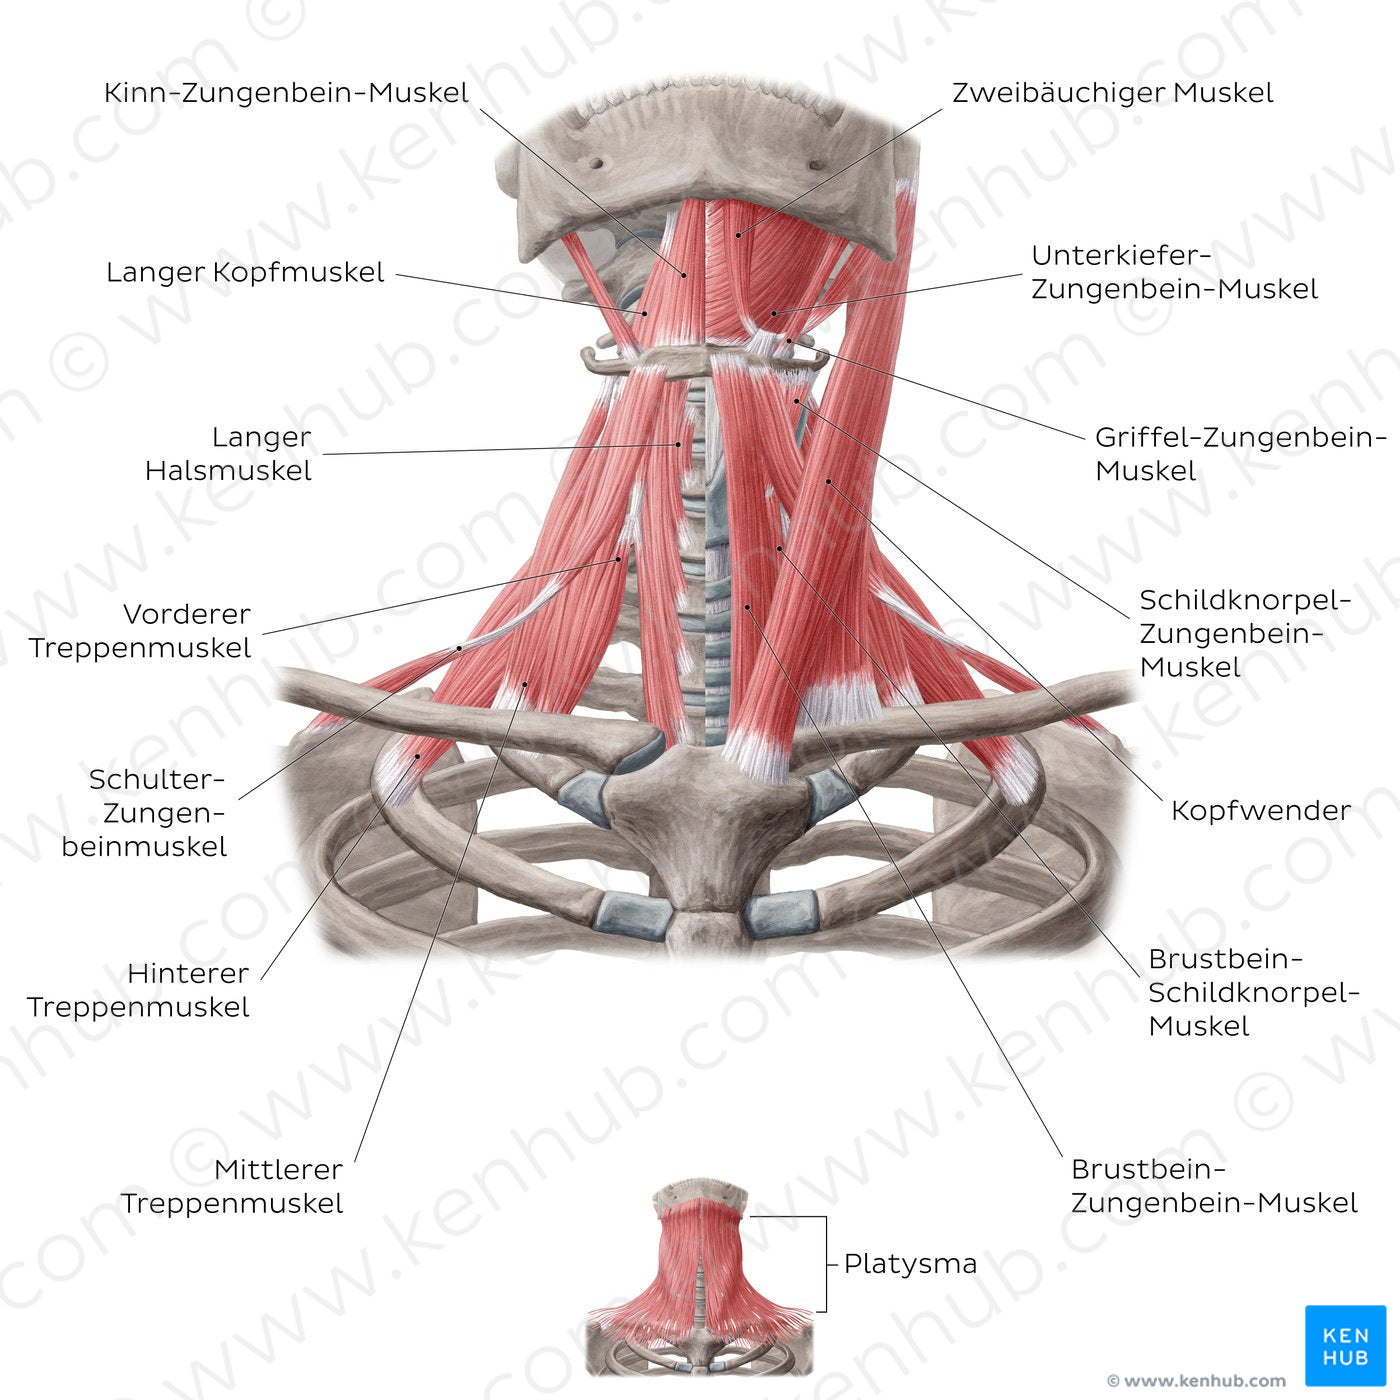 Muscles of the anterior neck (German)